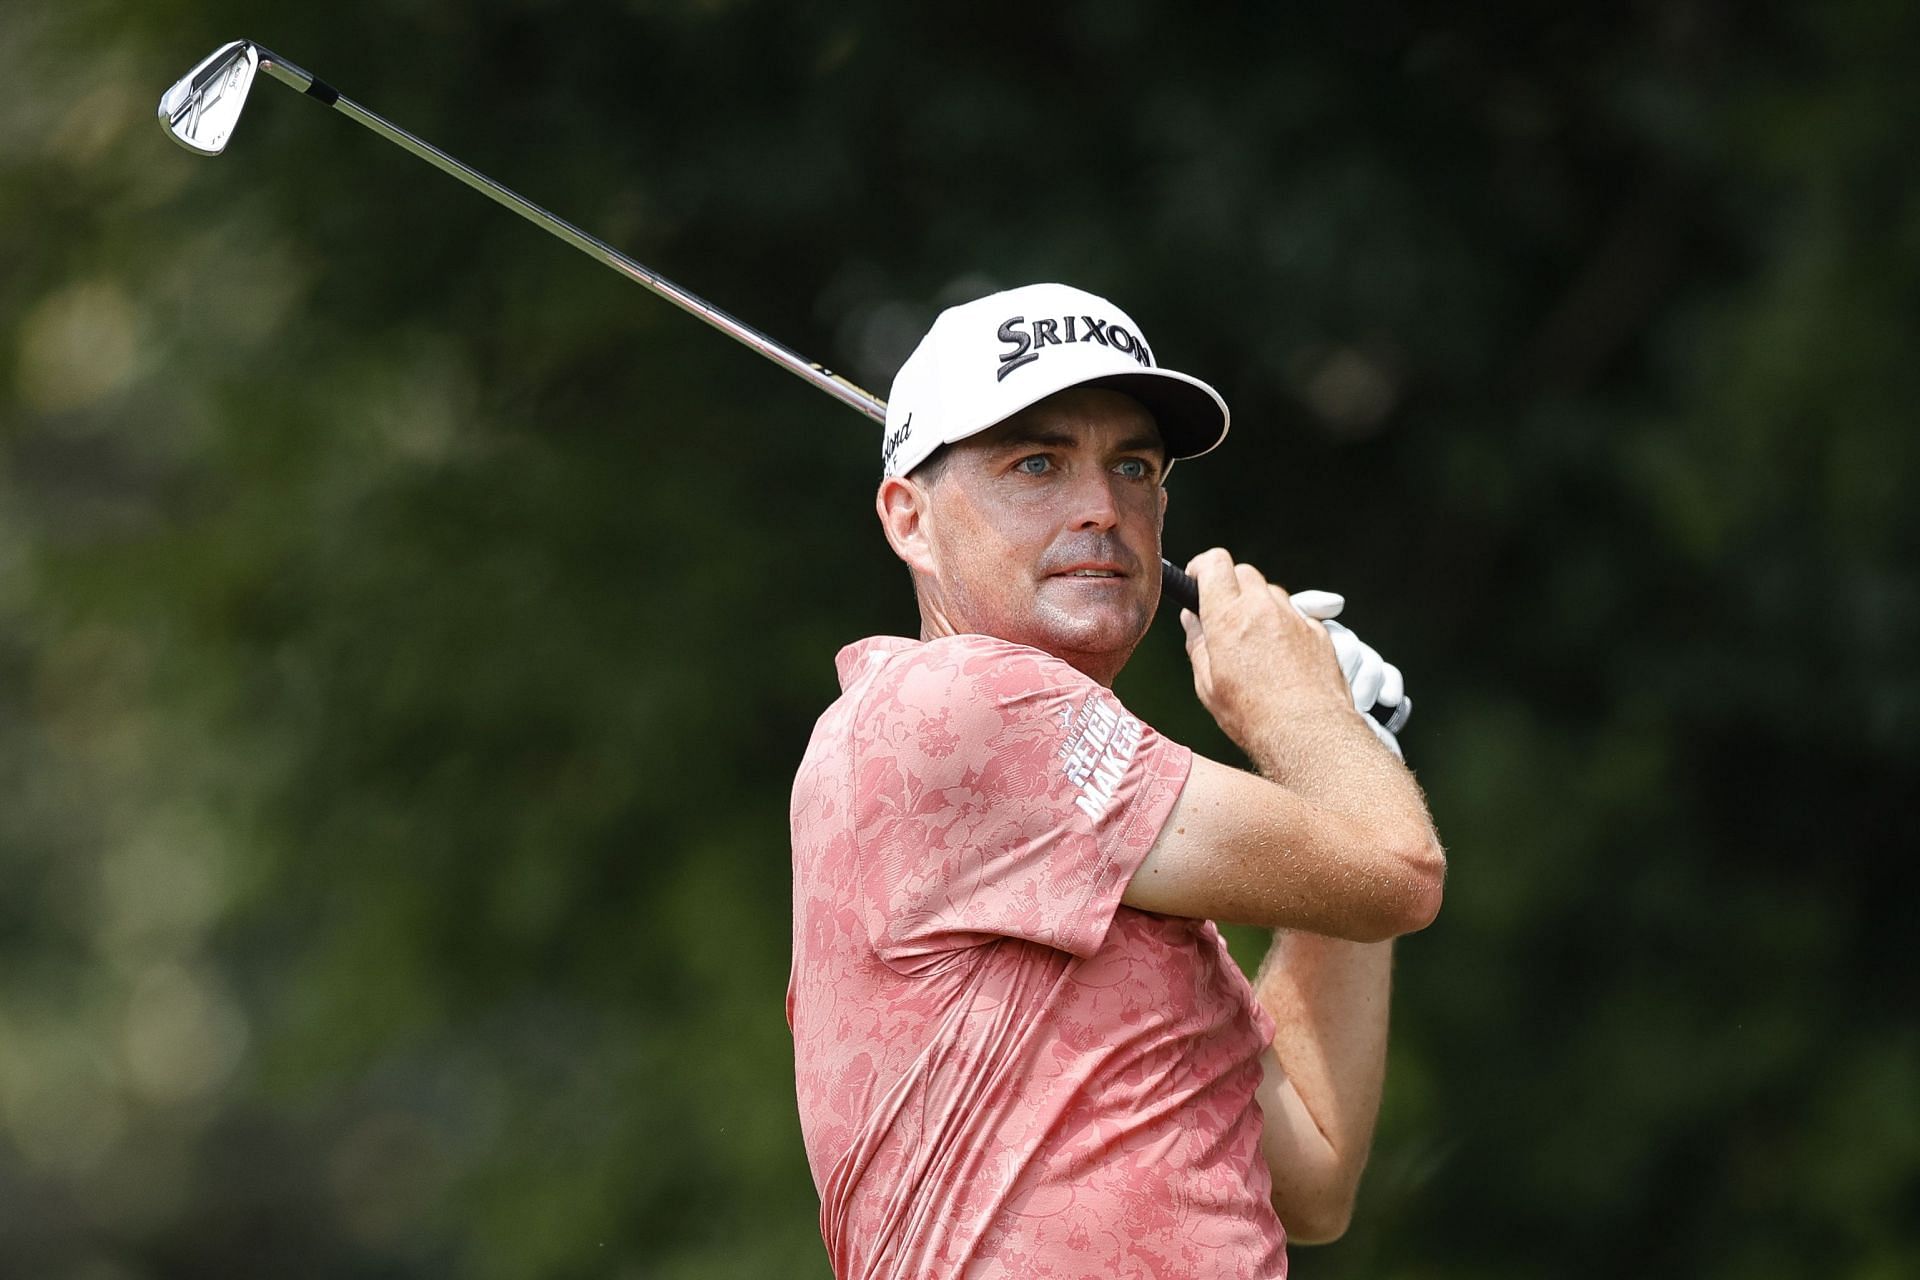 Keegan Bradley was left off the Ryder Cup team this year